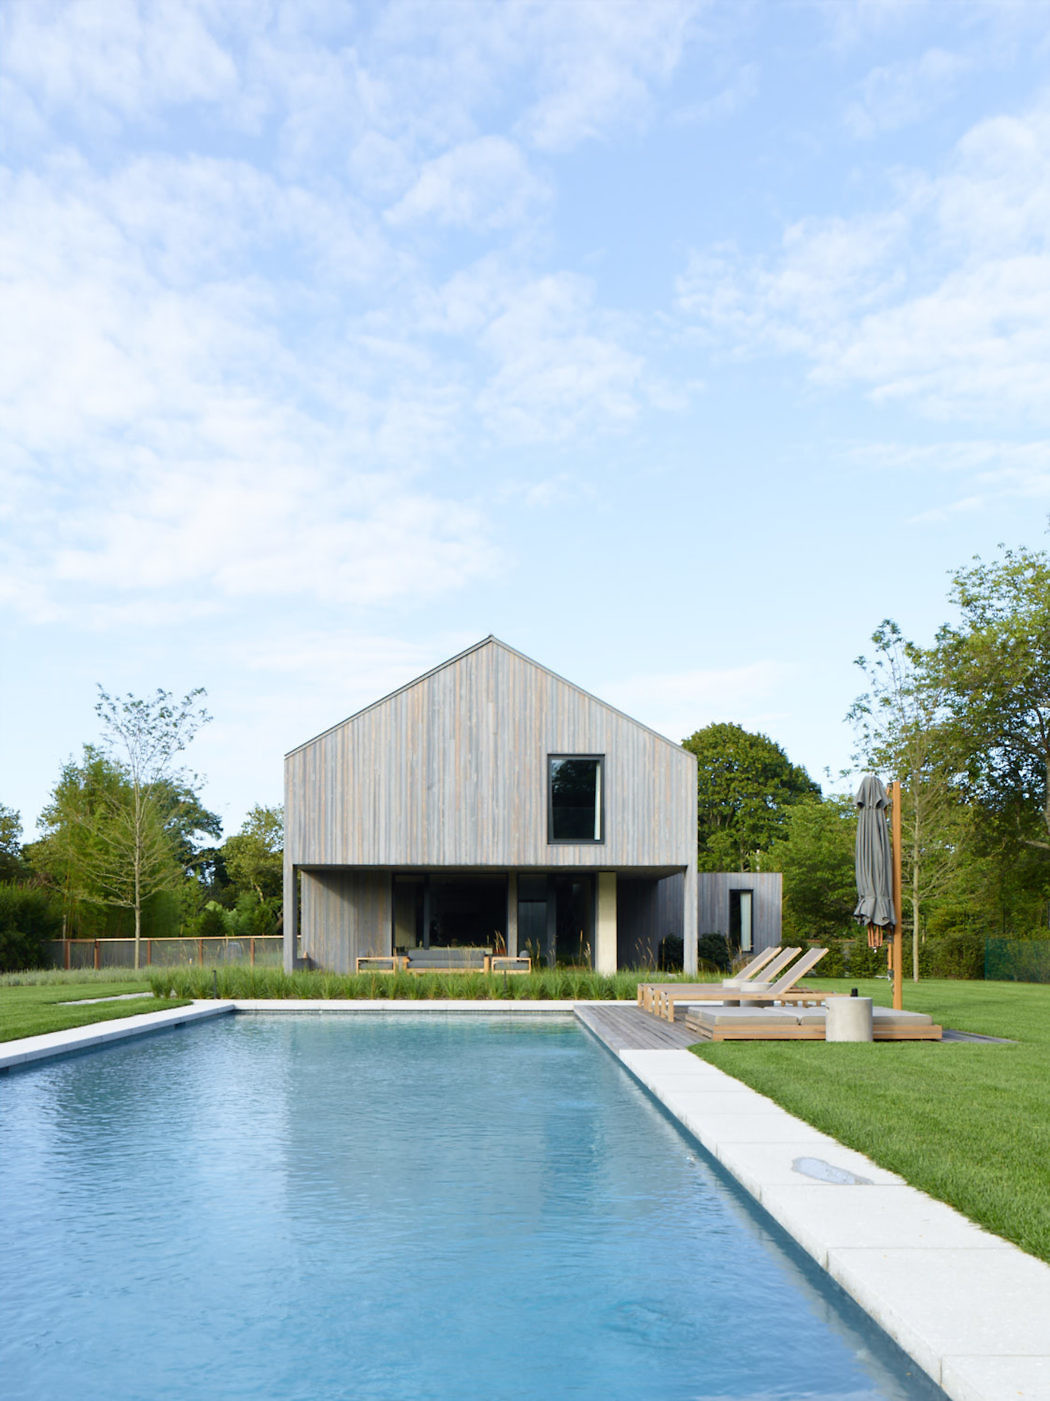 Modern house with a wooden facade and pool in a green lawn.